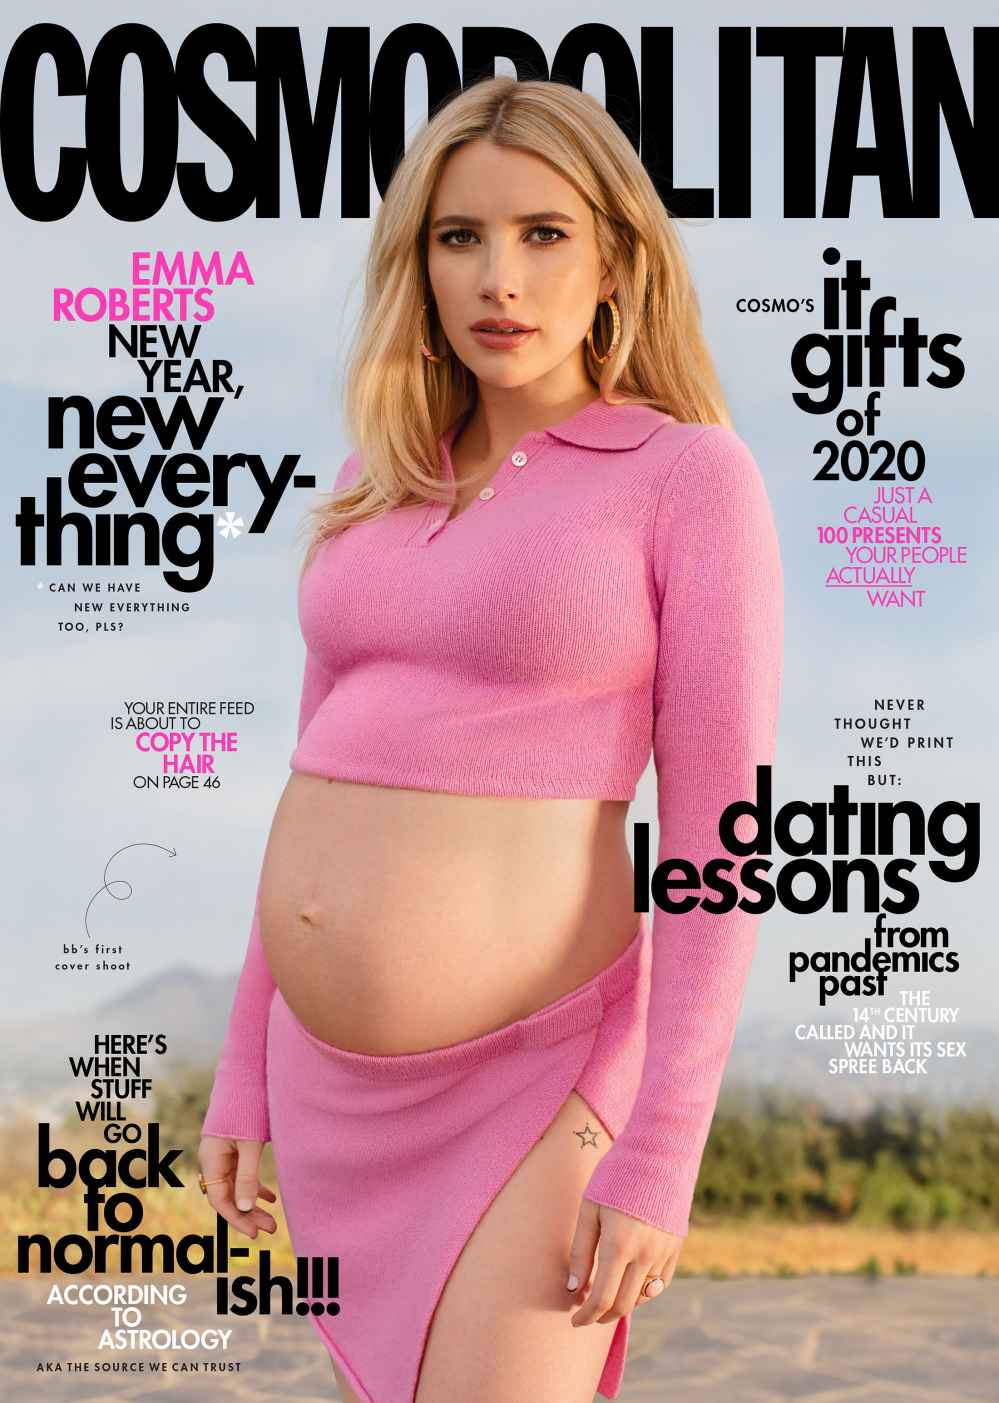 Emma Roberts Is the 1st Pregnant 'Cosmopolitan' Cover Star